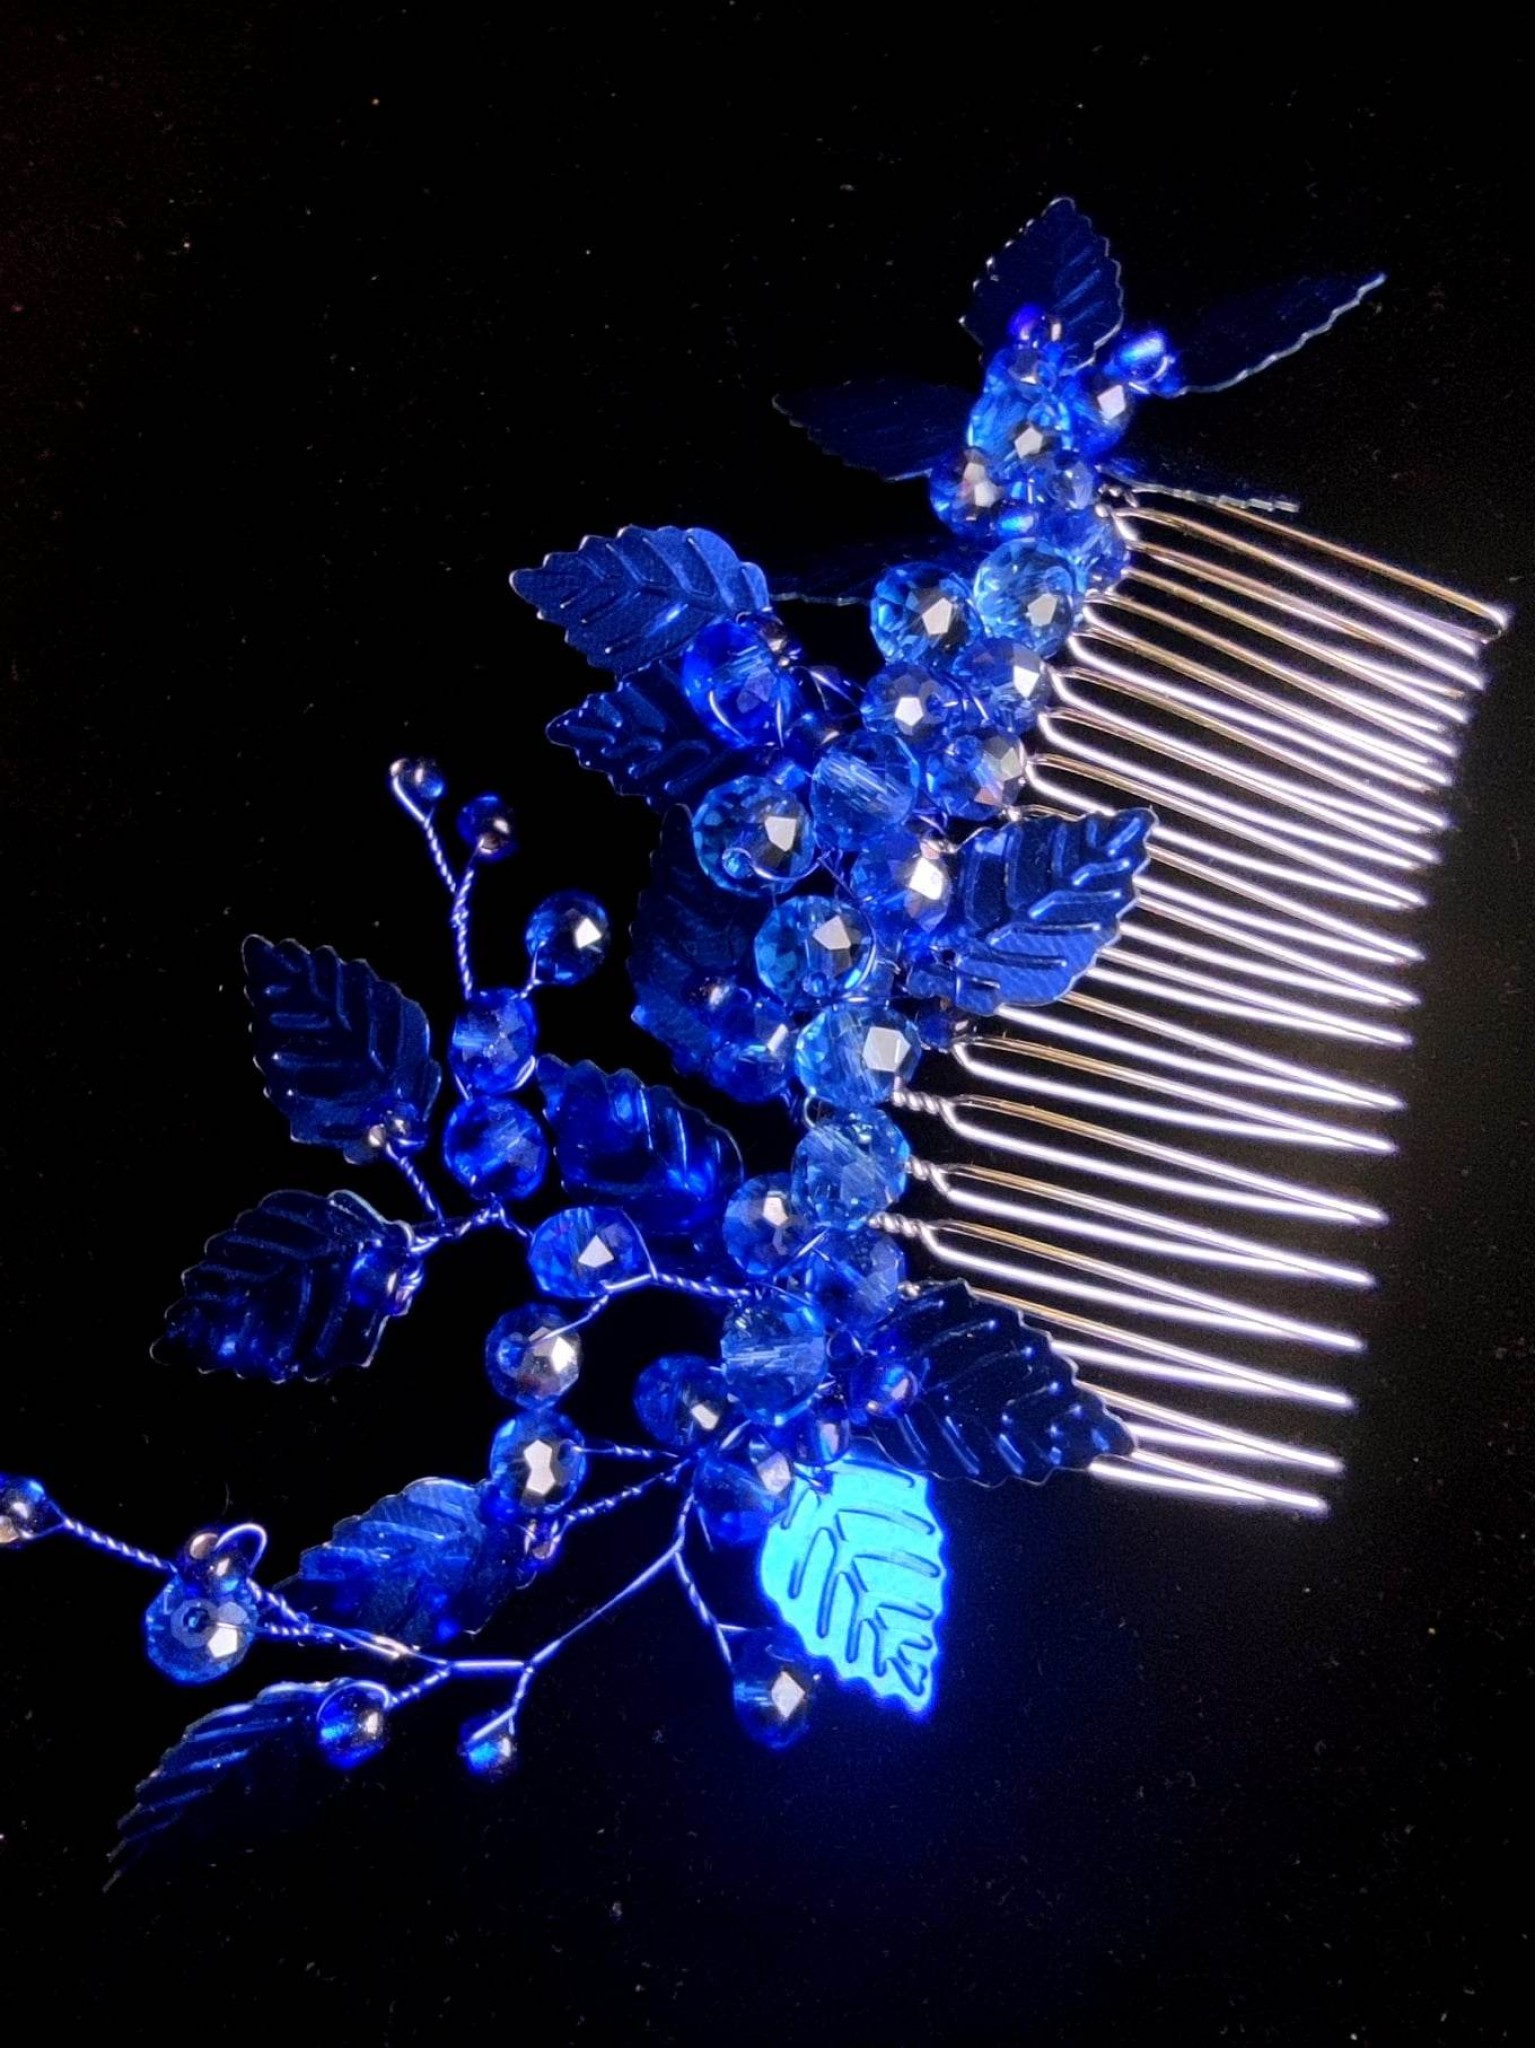 Unique Crystal Hair comb in Dark Blue with Crystals and Leaves - Goddess Asteria